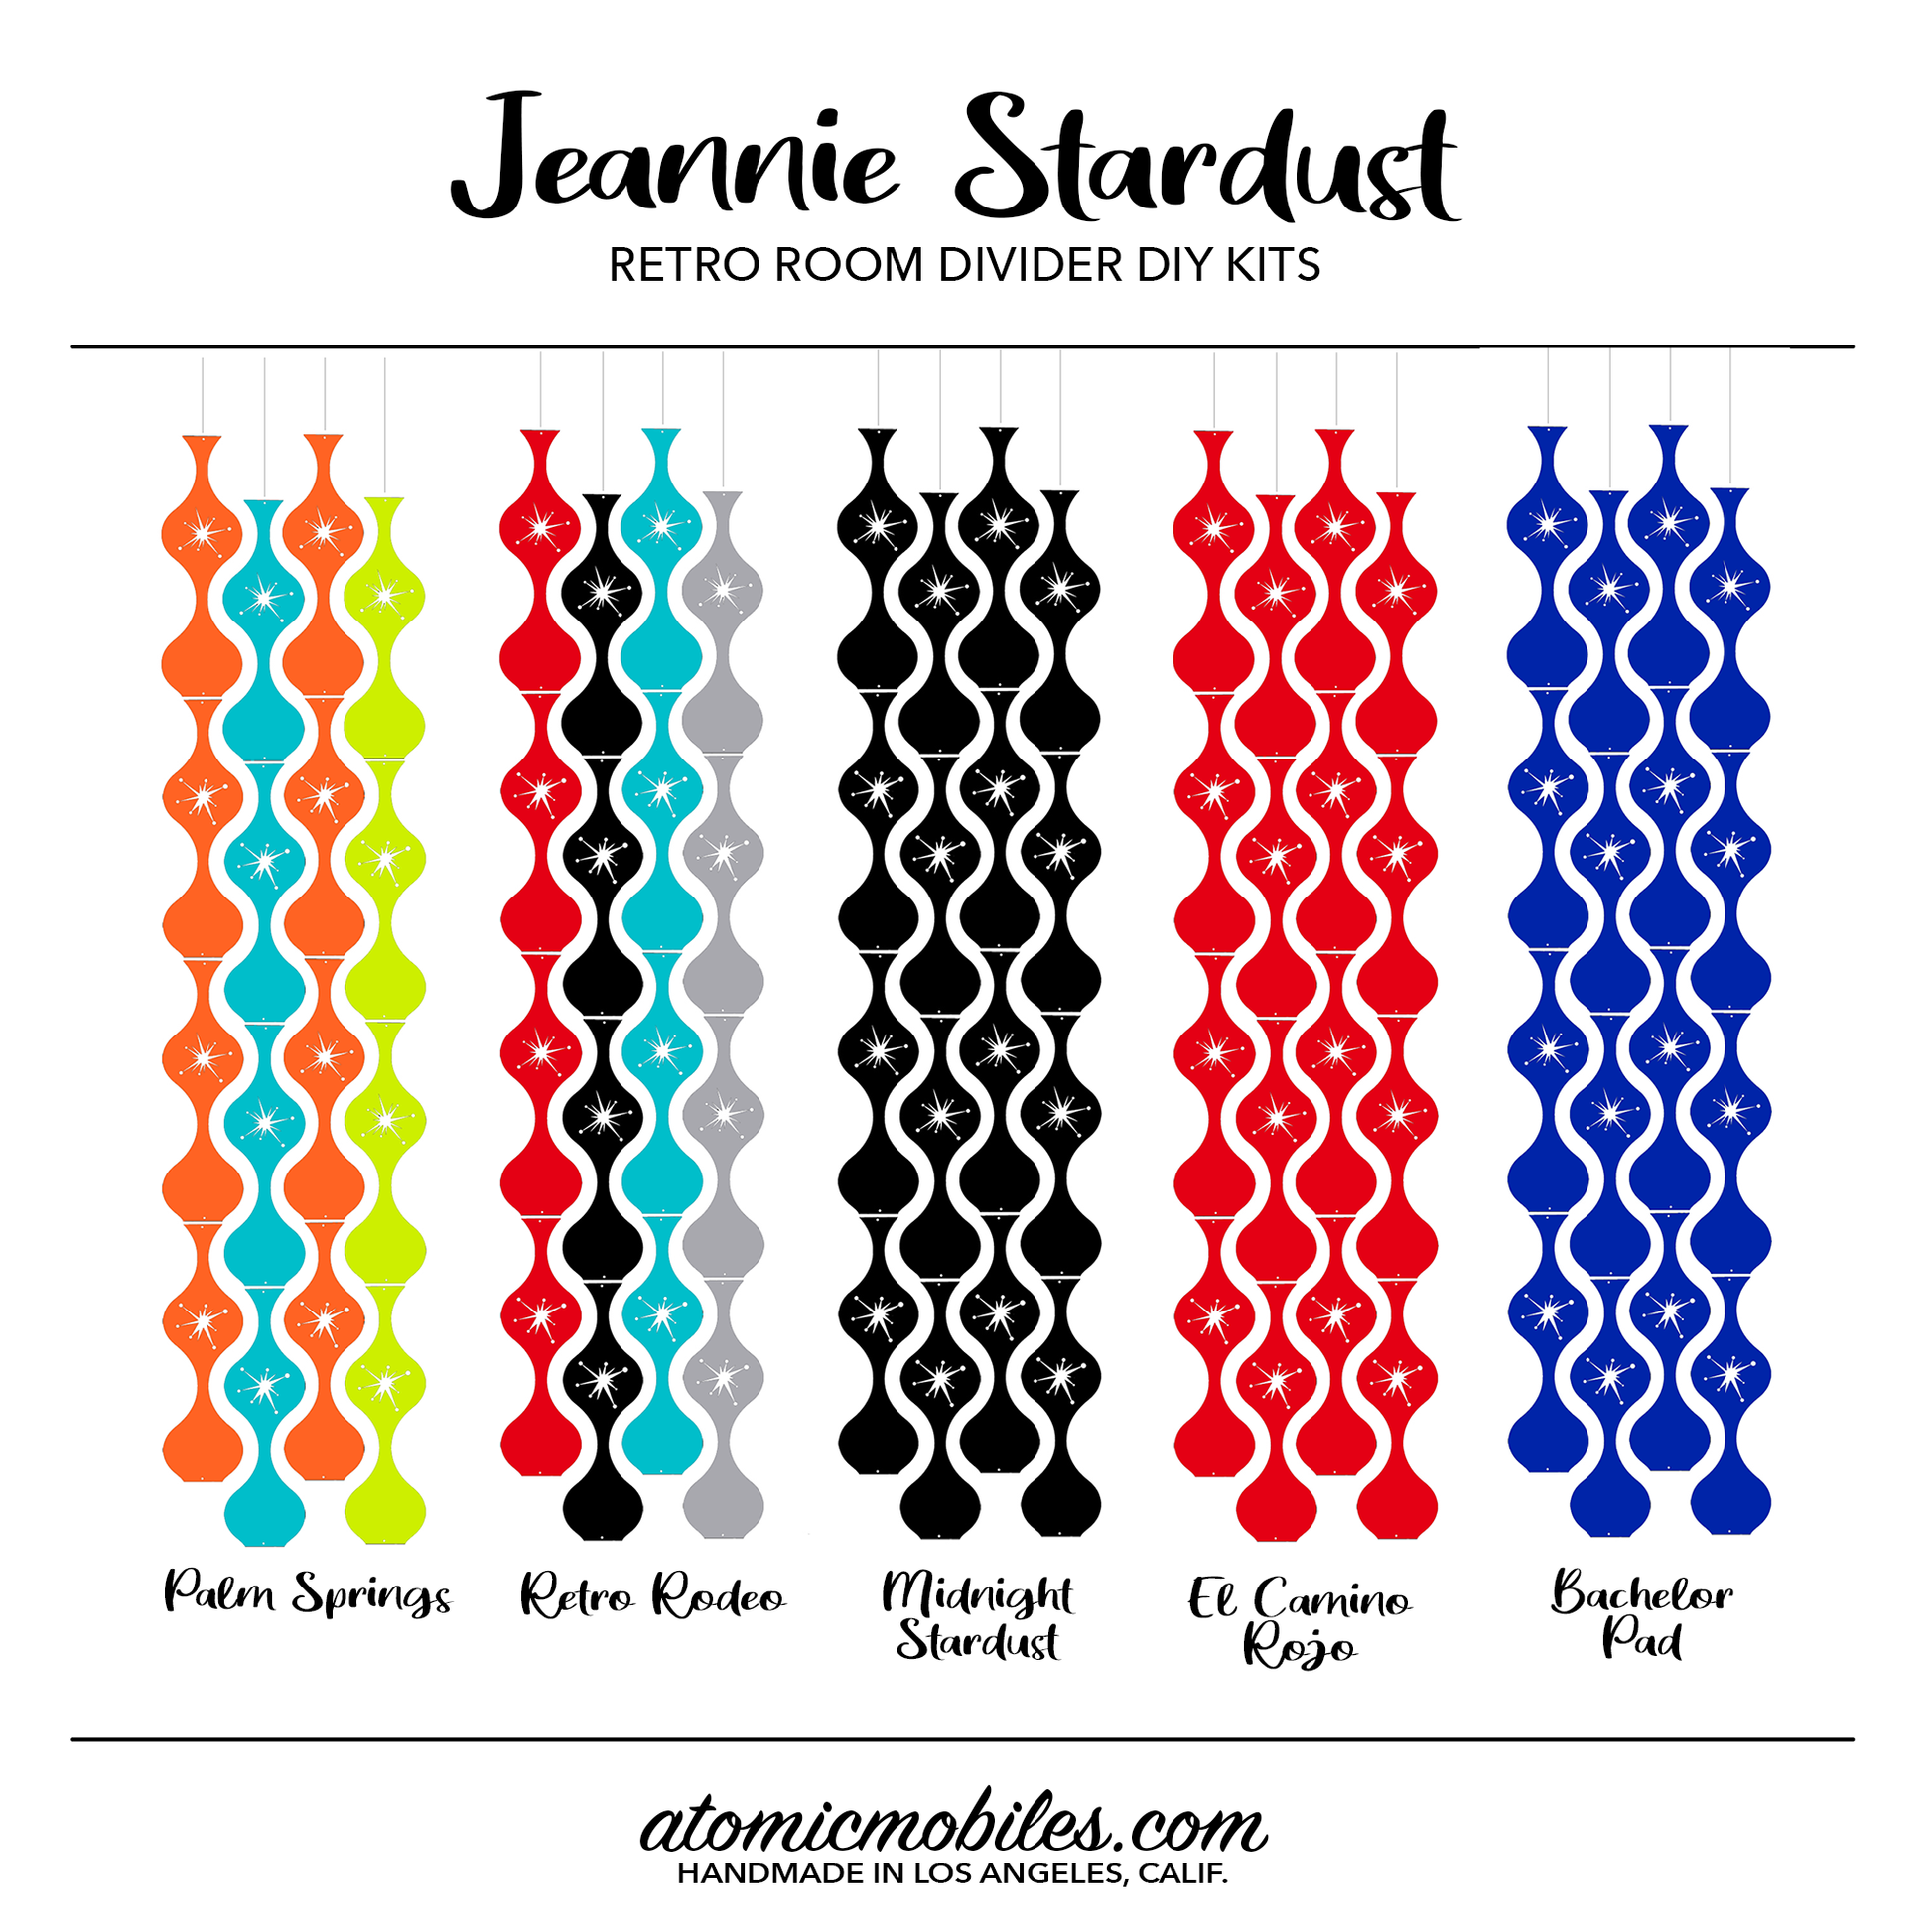 Jeannie Stardust Mid Century Modern retro room divider panels DIY Kit Colors - by AtomicMobiles.com